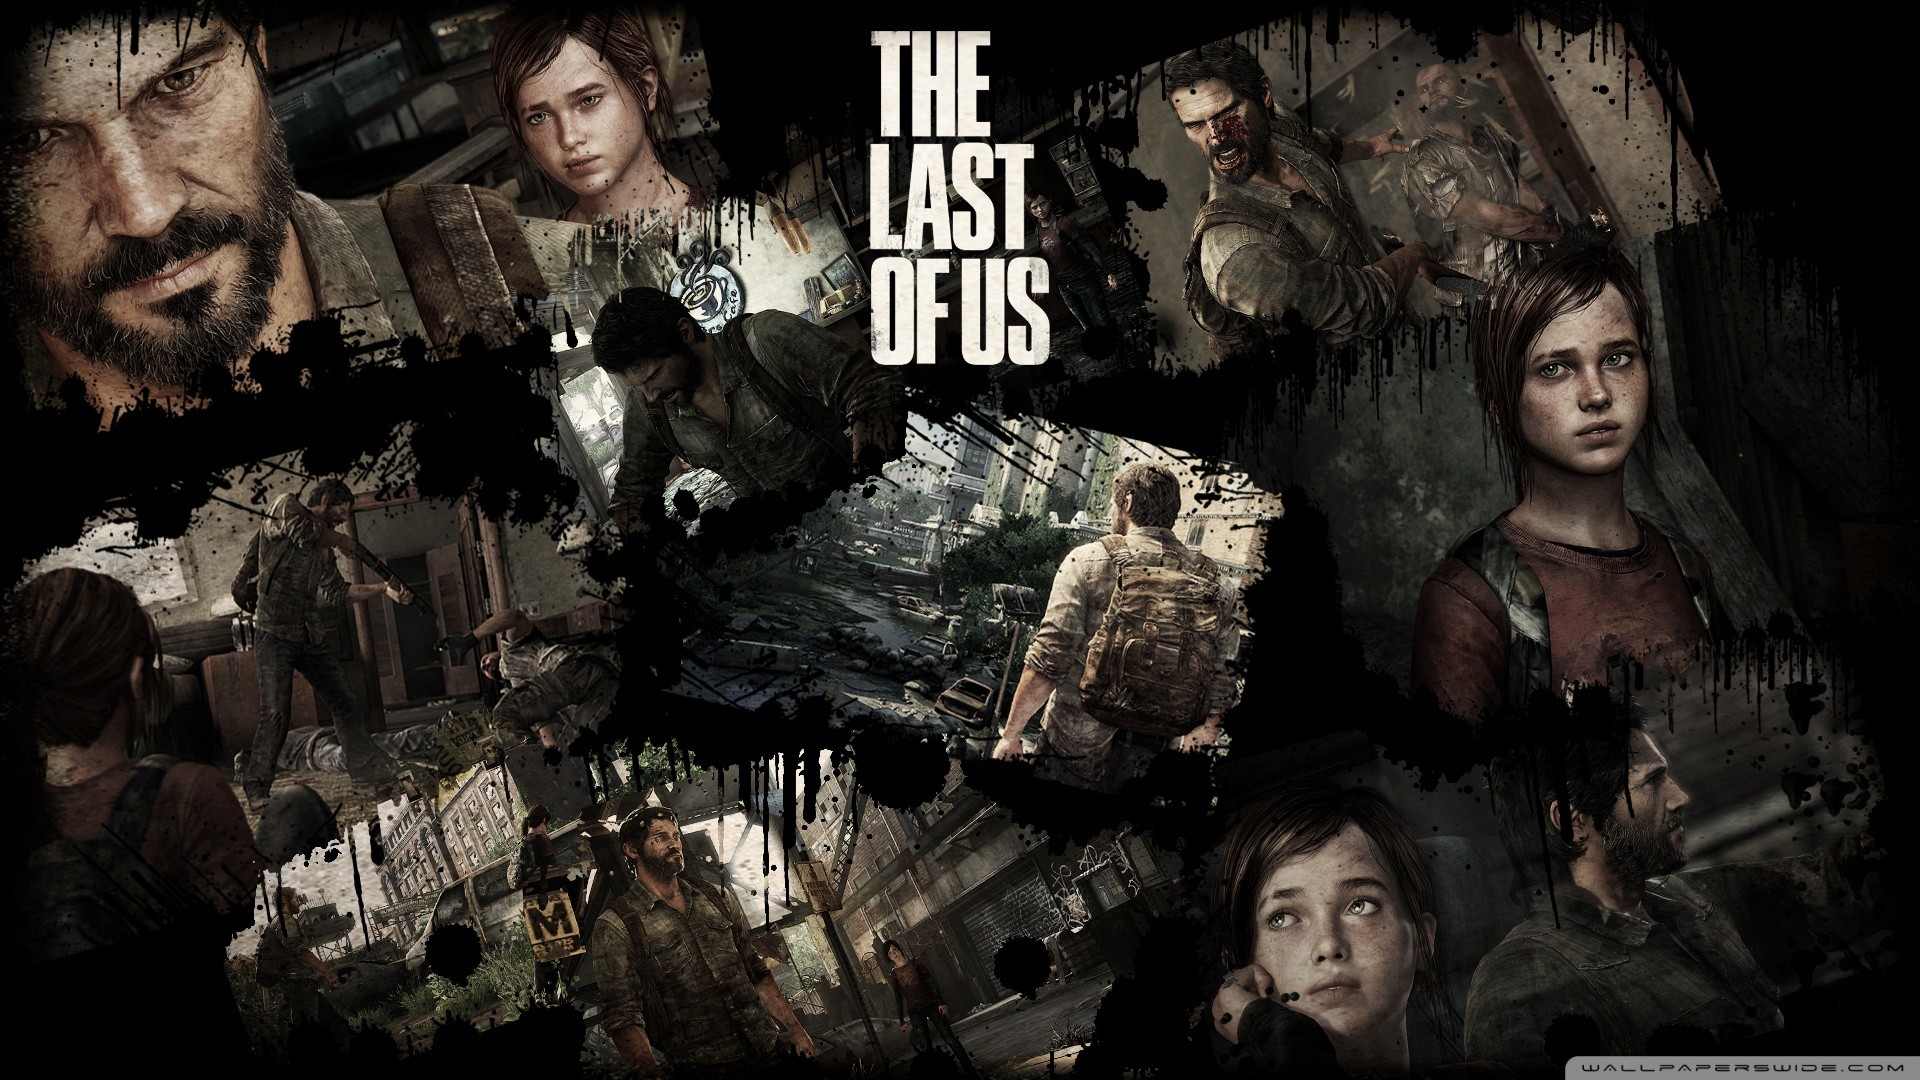 General 1920x1080 The Last of Us Joel Miller collage video game girls video game characters video game men video games apocalyptic dystopian Ellie Williams